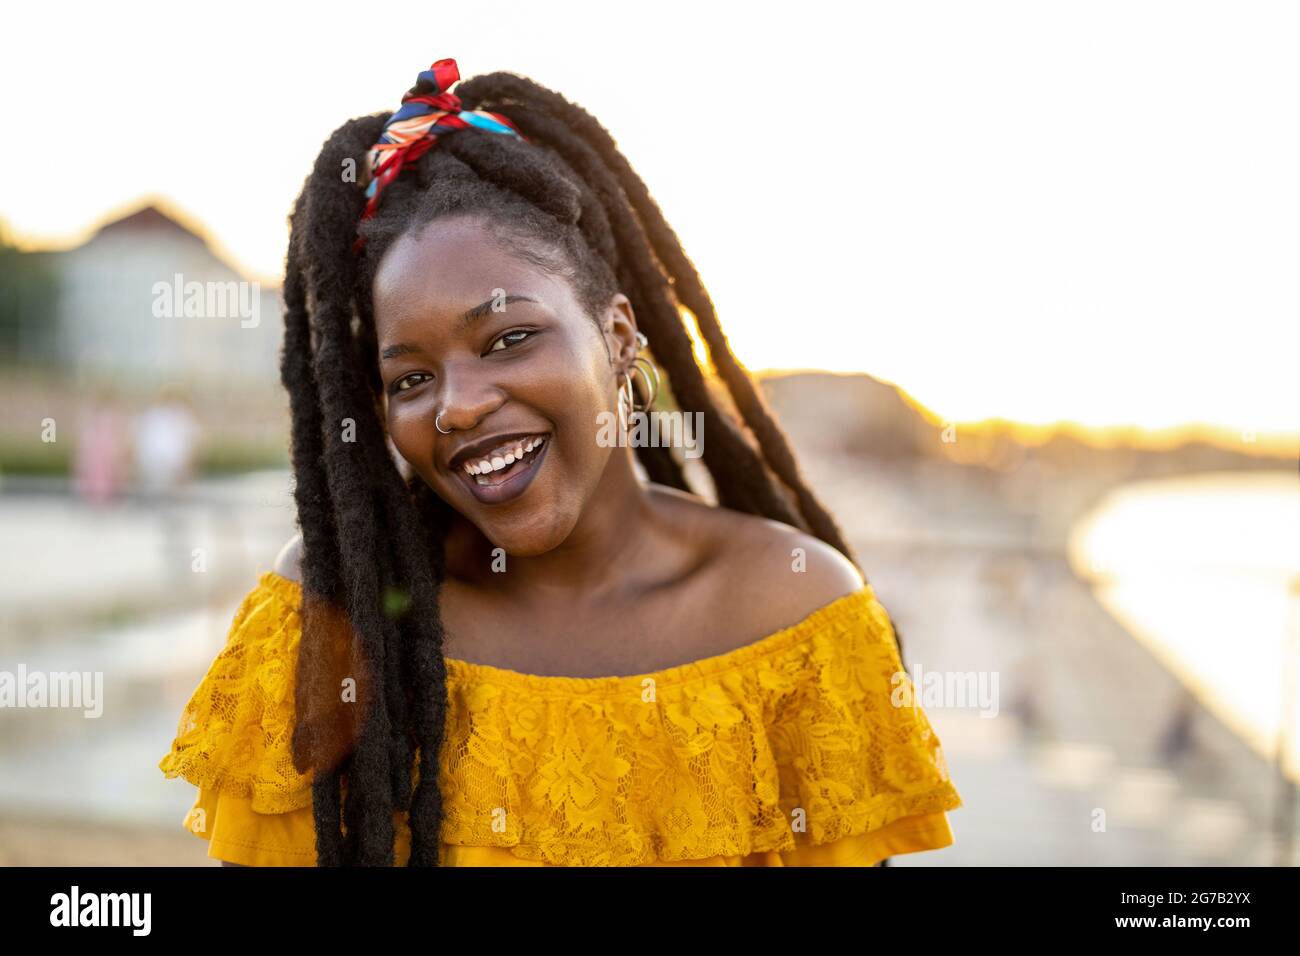 Happy young woman with dreadlocks outdoors Stock Photo